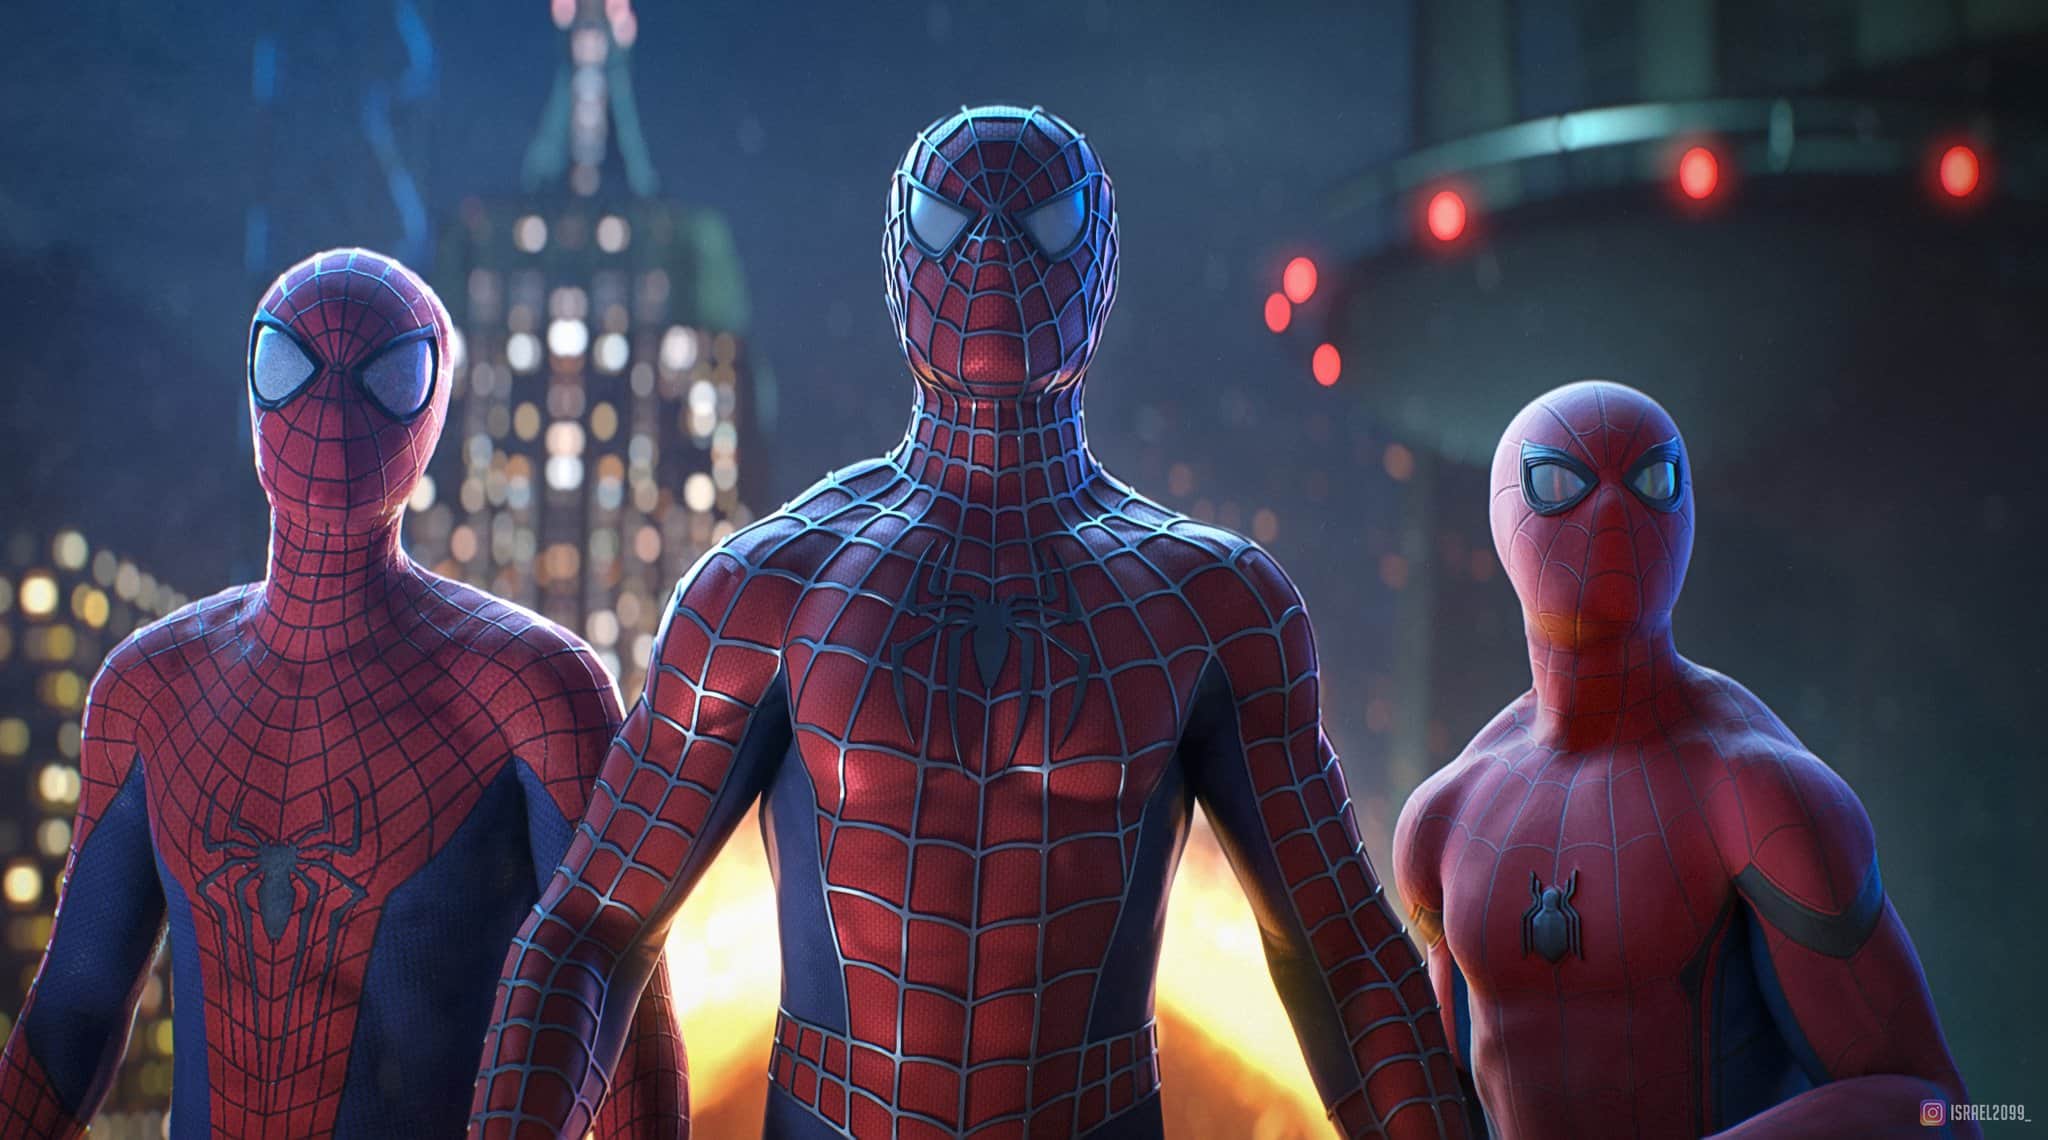 You are currently viewing Spider-man no way home Teaser Trailer Review